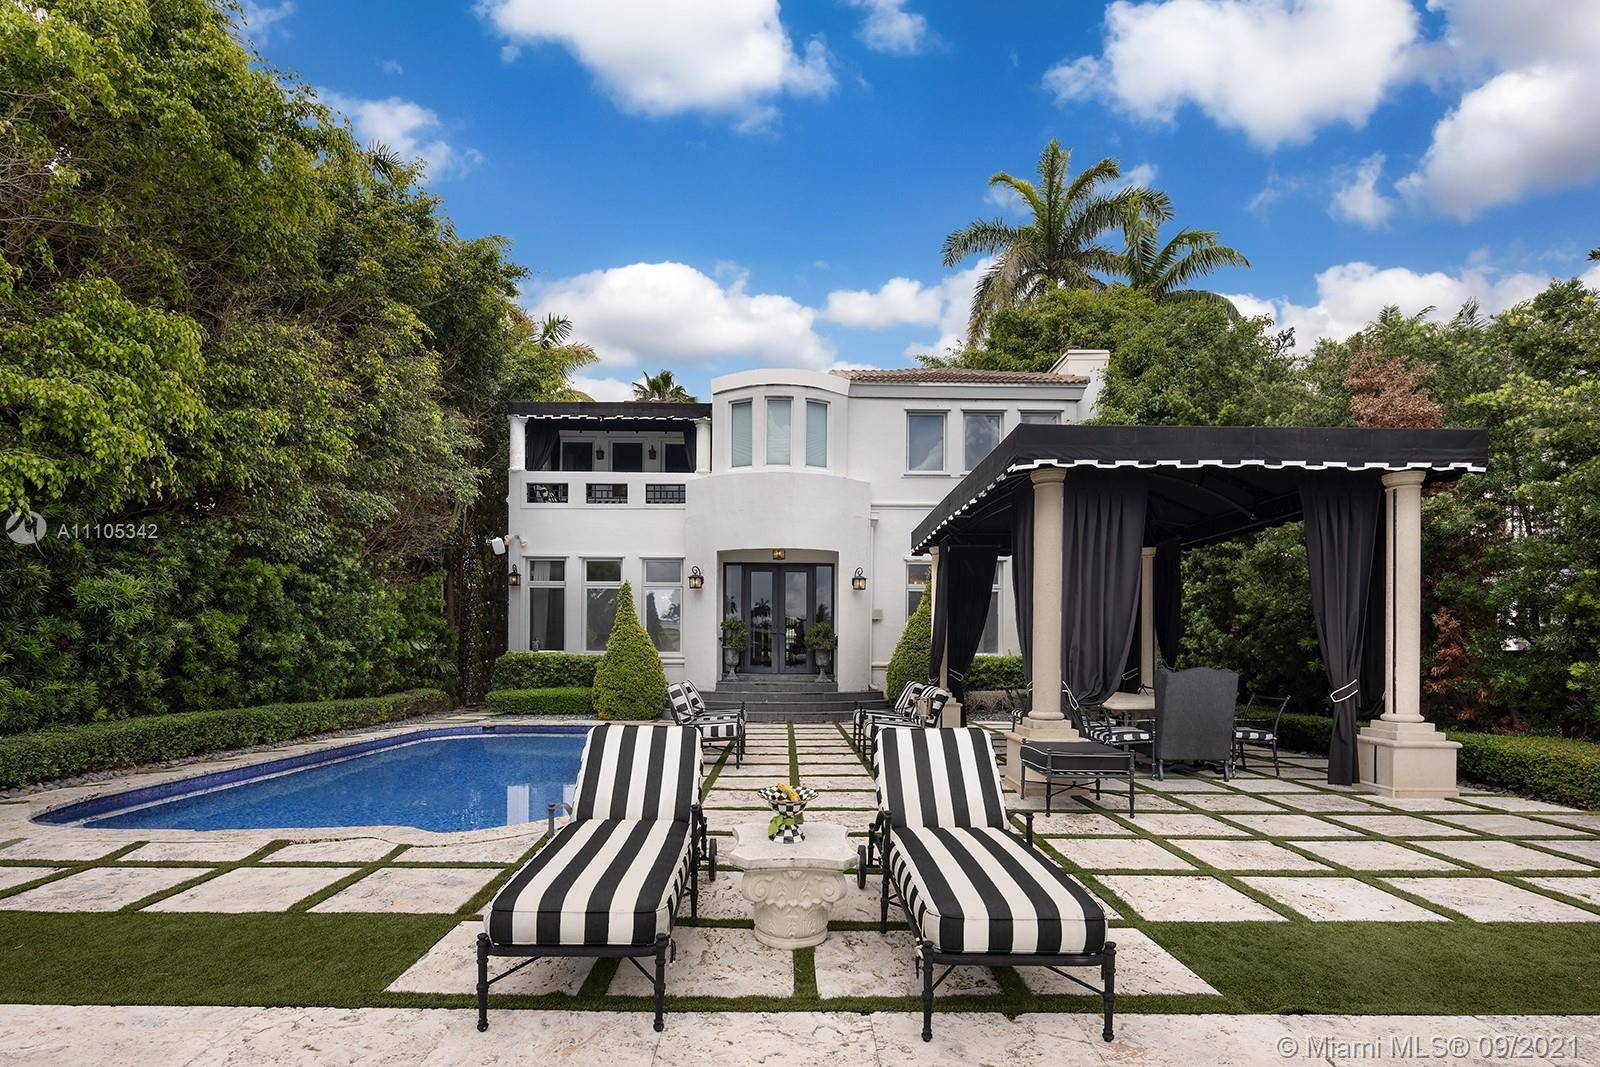 Step Inside With Me ! This European inspired waterfront Venetian Islands home was designed by Sam Robbins with architecture by Kobi Karp.